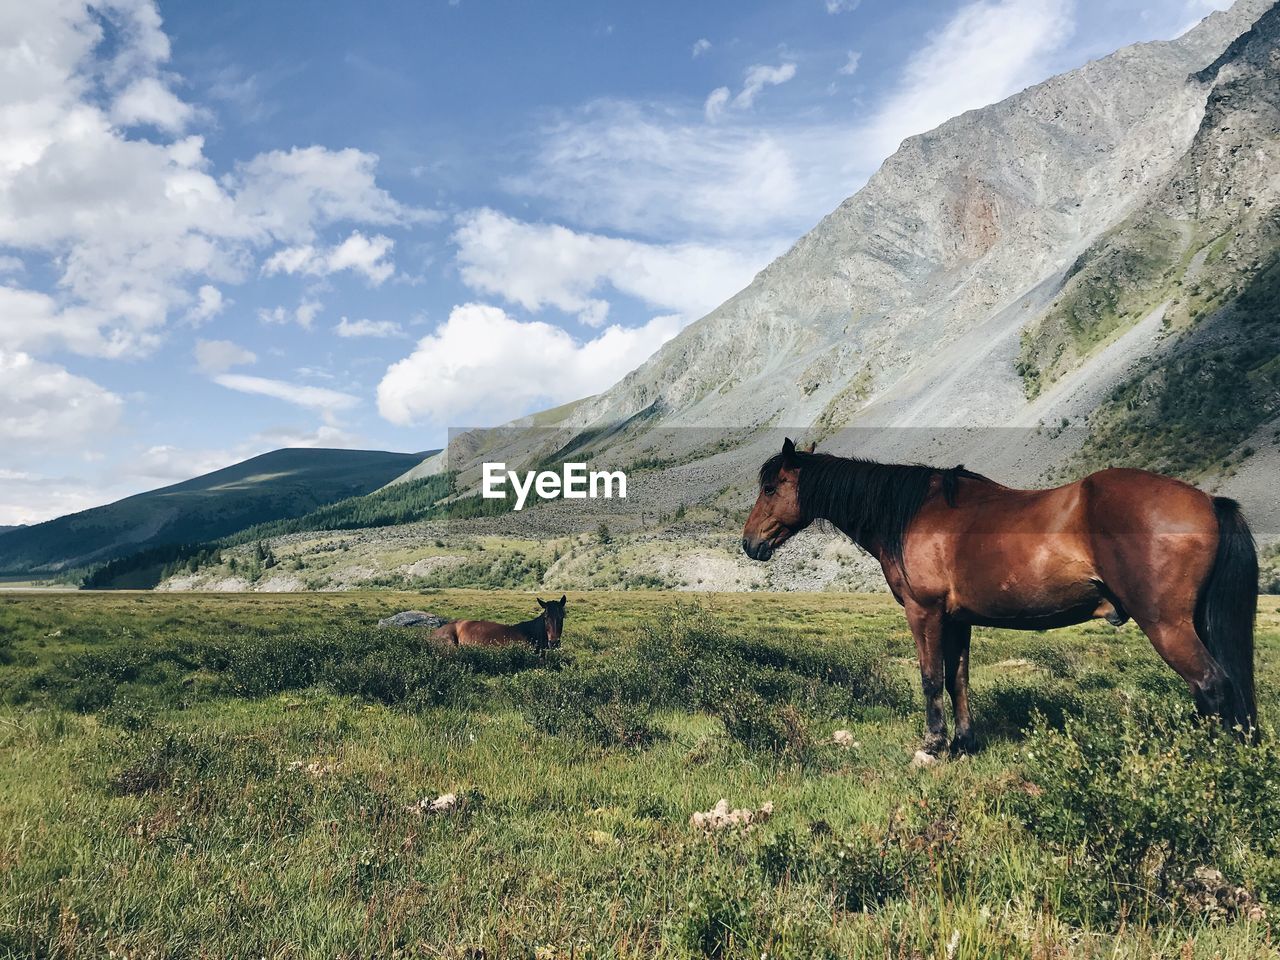 HORSE ON FIELD AGAINST MOUNTAINS